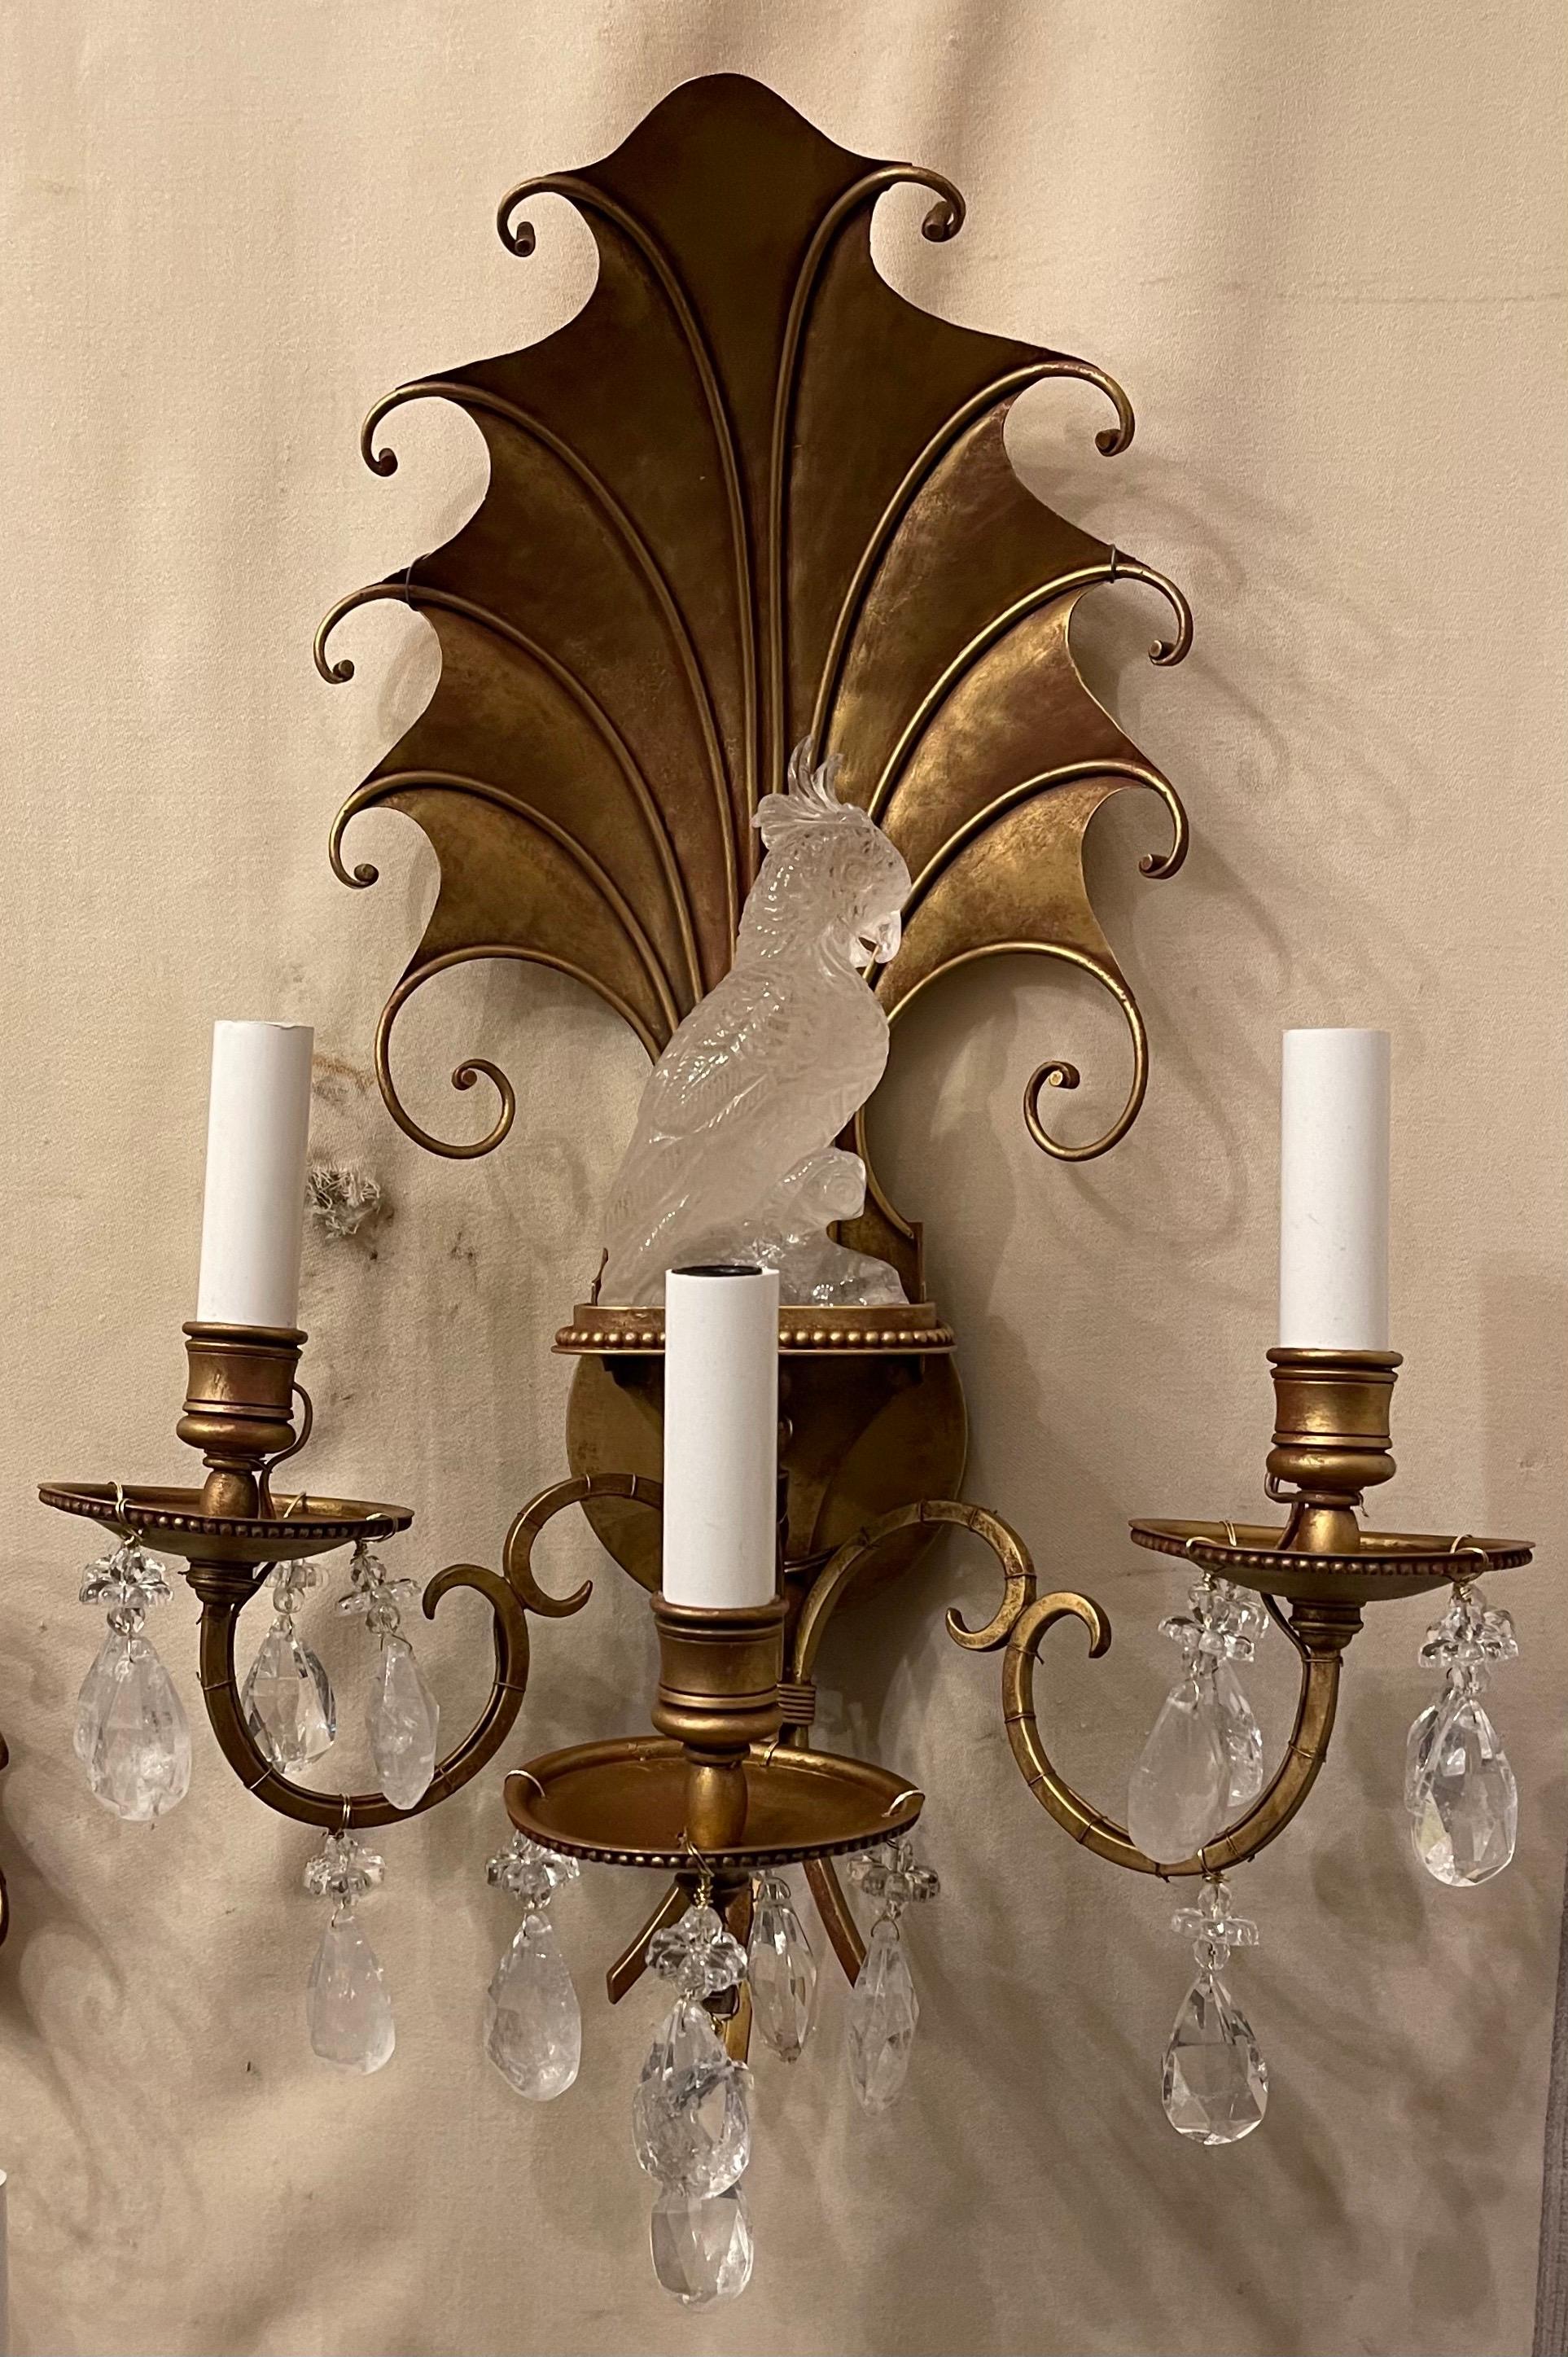 A wonderful vintage pair of gold gilt shell form and rock crystal cockatoo bird sconces in the manner of Maison Baguès each with three candelabra sockets that have been completely rewired and come with mounting hardware for installation.